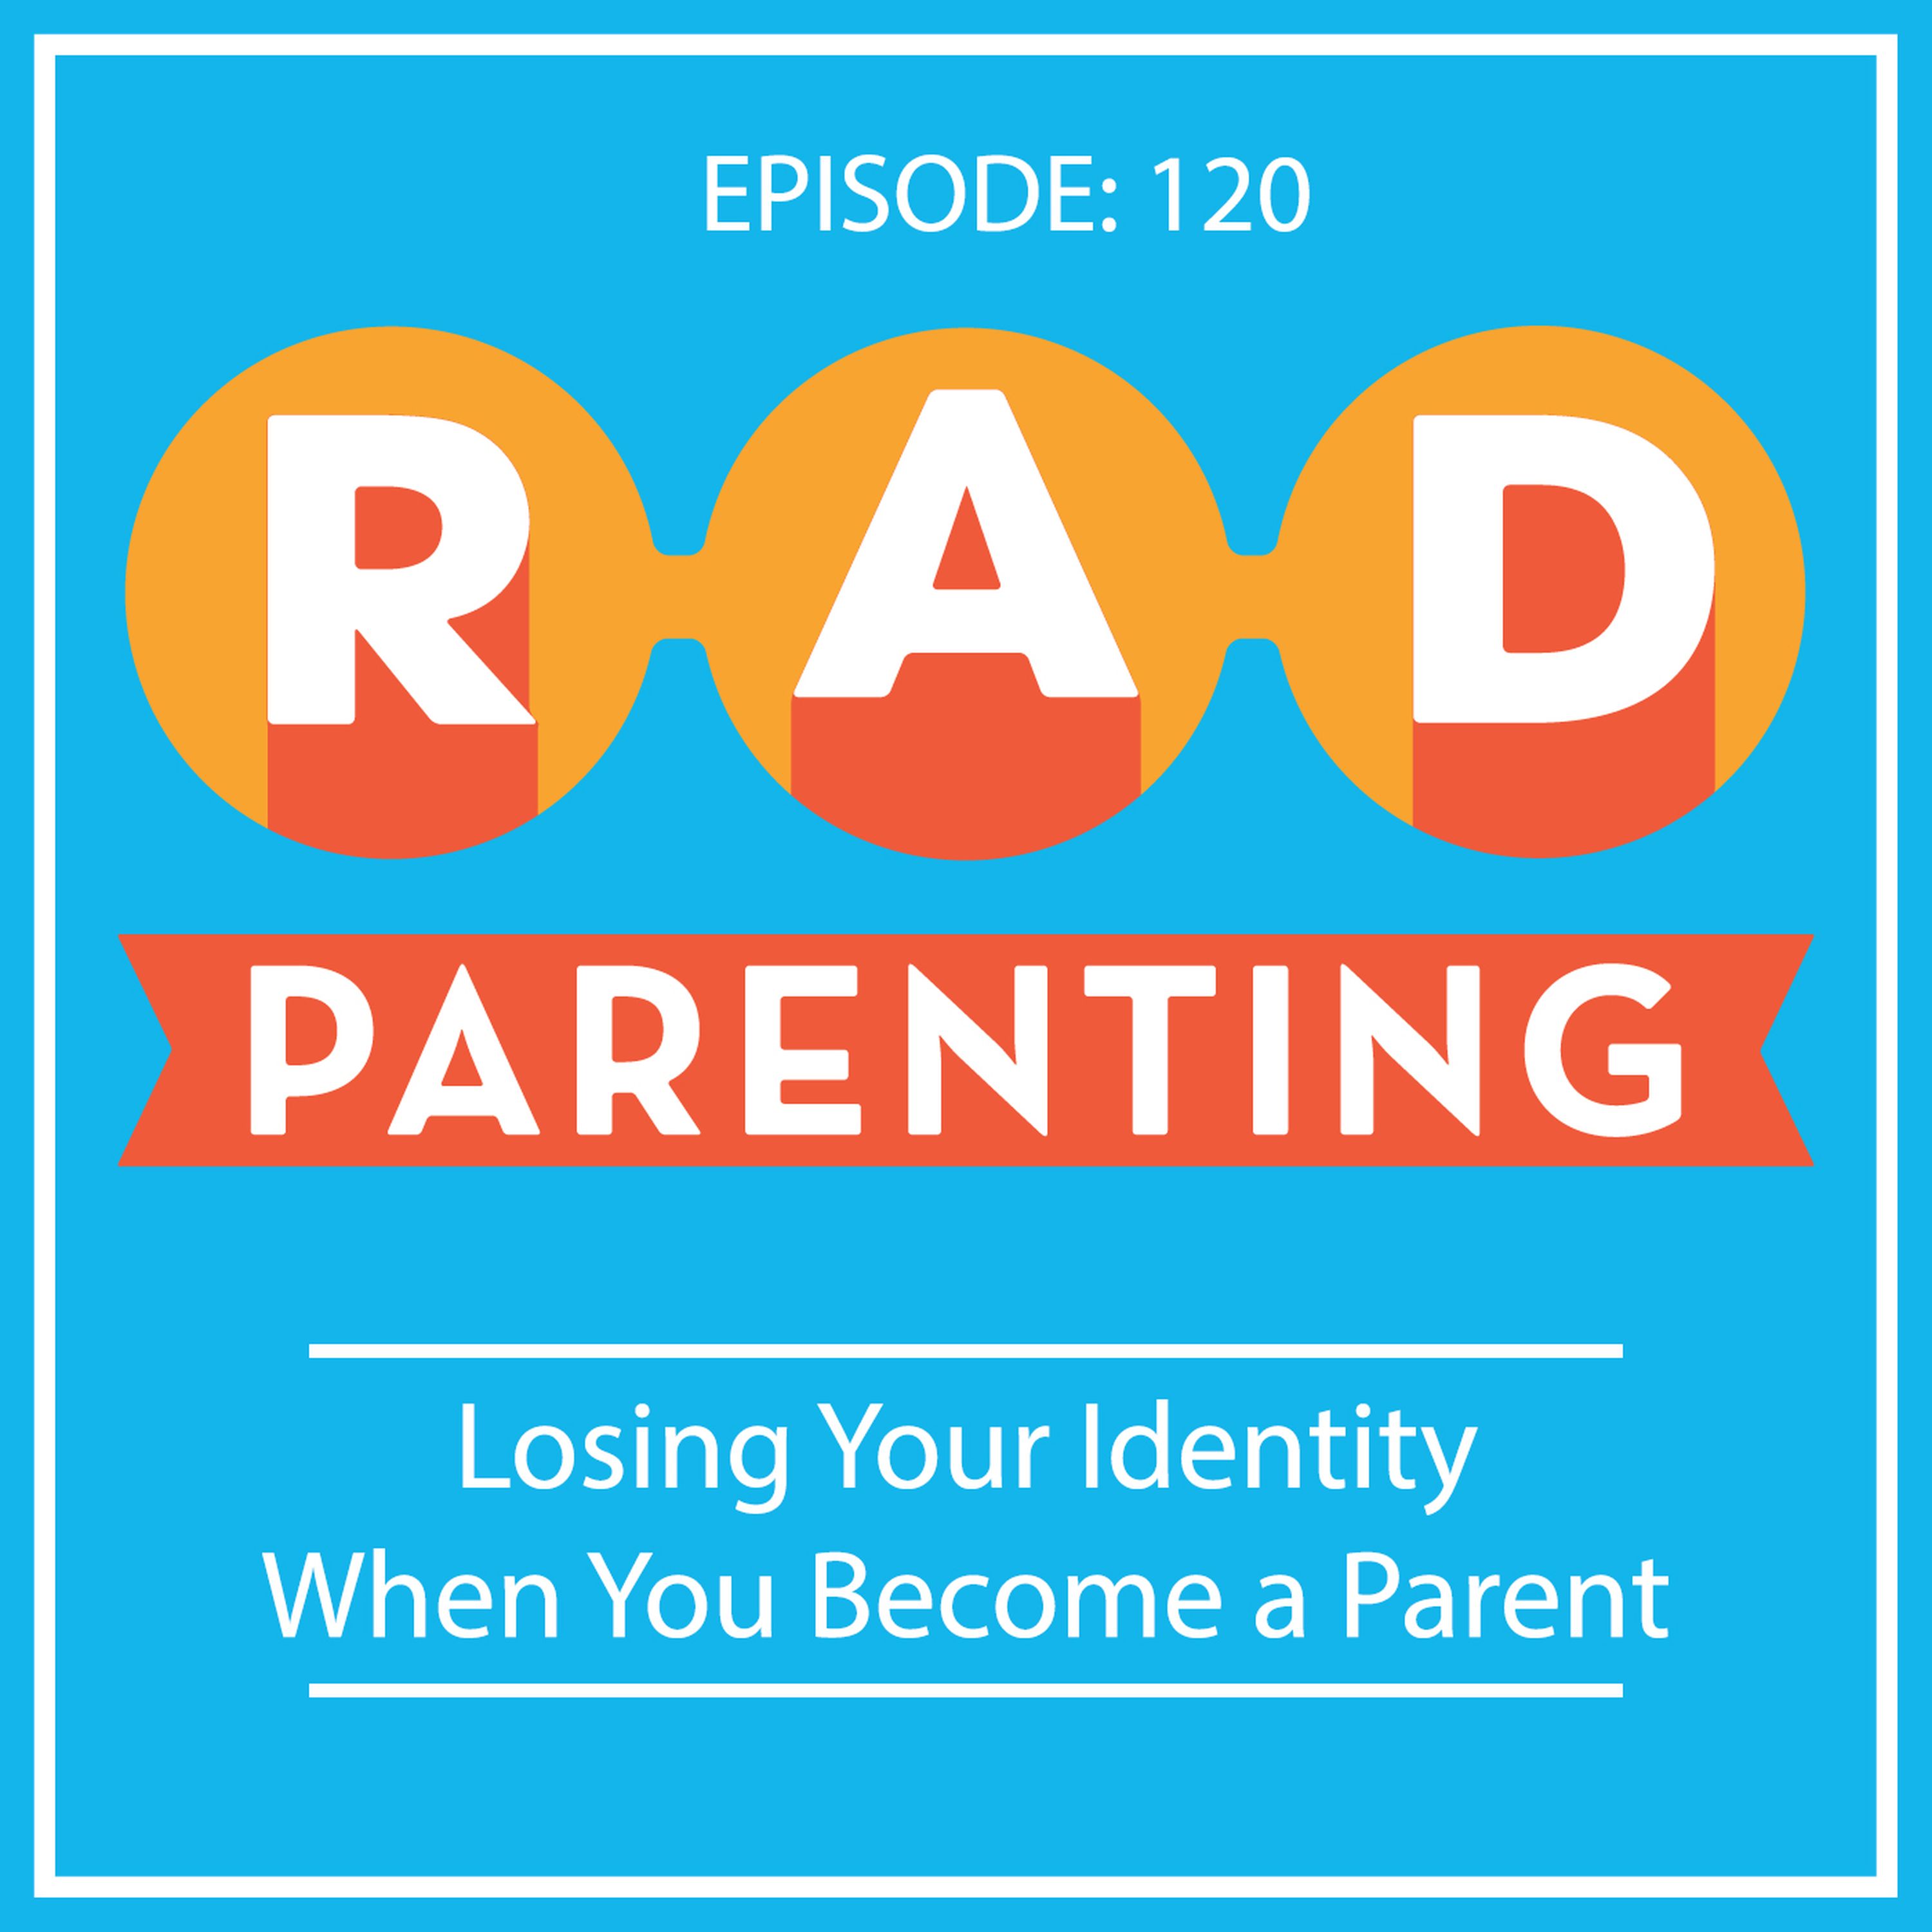 Losing Your Identity When You Become a Parent